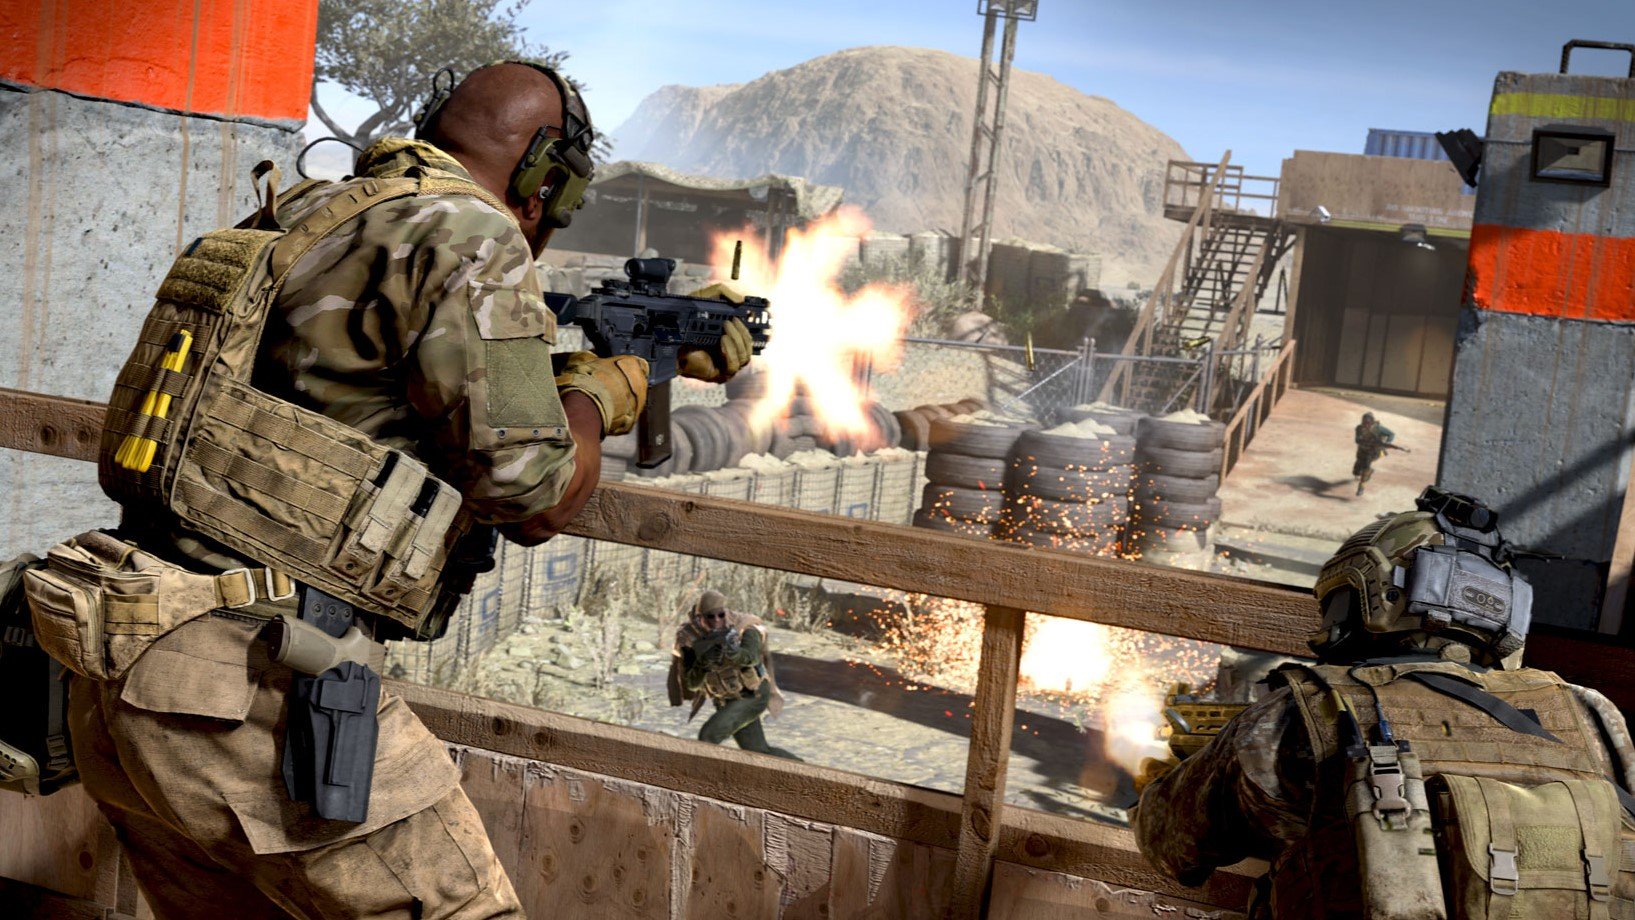 Call of Duty Free Download: Where and How